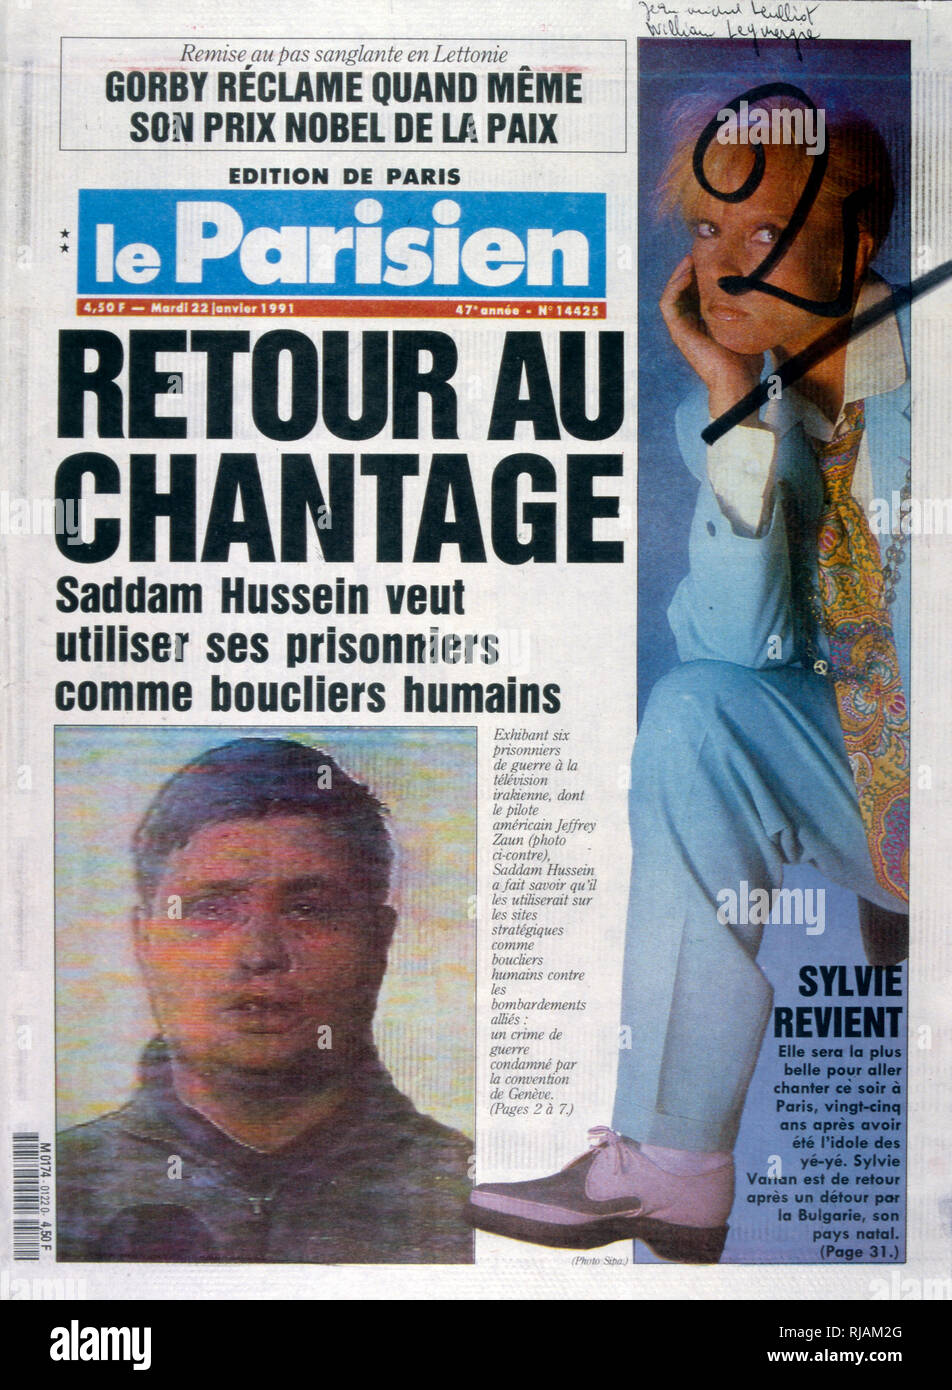 headline in 'le Parisien' a French newspaper, 2nnd January 1991, concerning captured US pilot during the Gulf War (2 August 1990 - 28 February 1991). codenamed Operation Desert Shield and Operation Desert Storm, the war waged by coalition forces from 35 nations led by the United States against Iraq in response to Iraq's invasion and annexation of Kuwait. the pictures show French filed commanders and the French War cabinet under President Mitterrand. Stock Photo